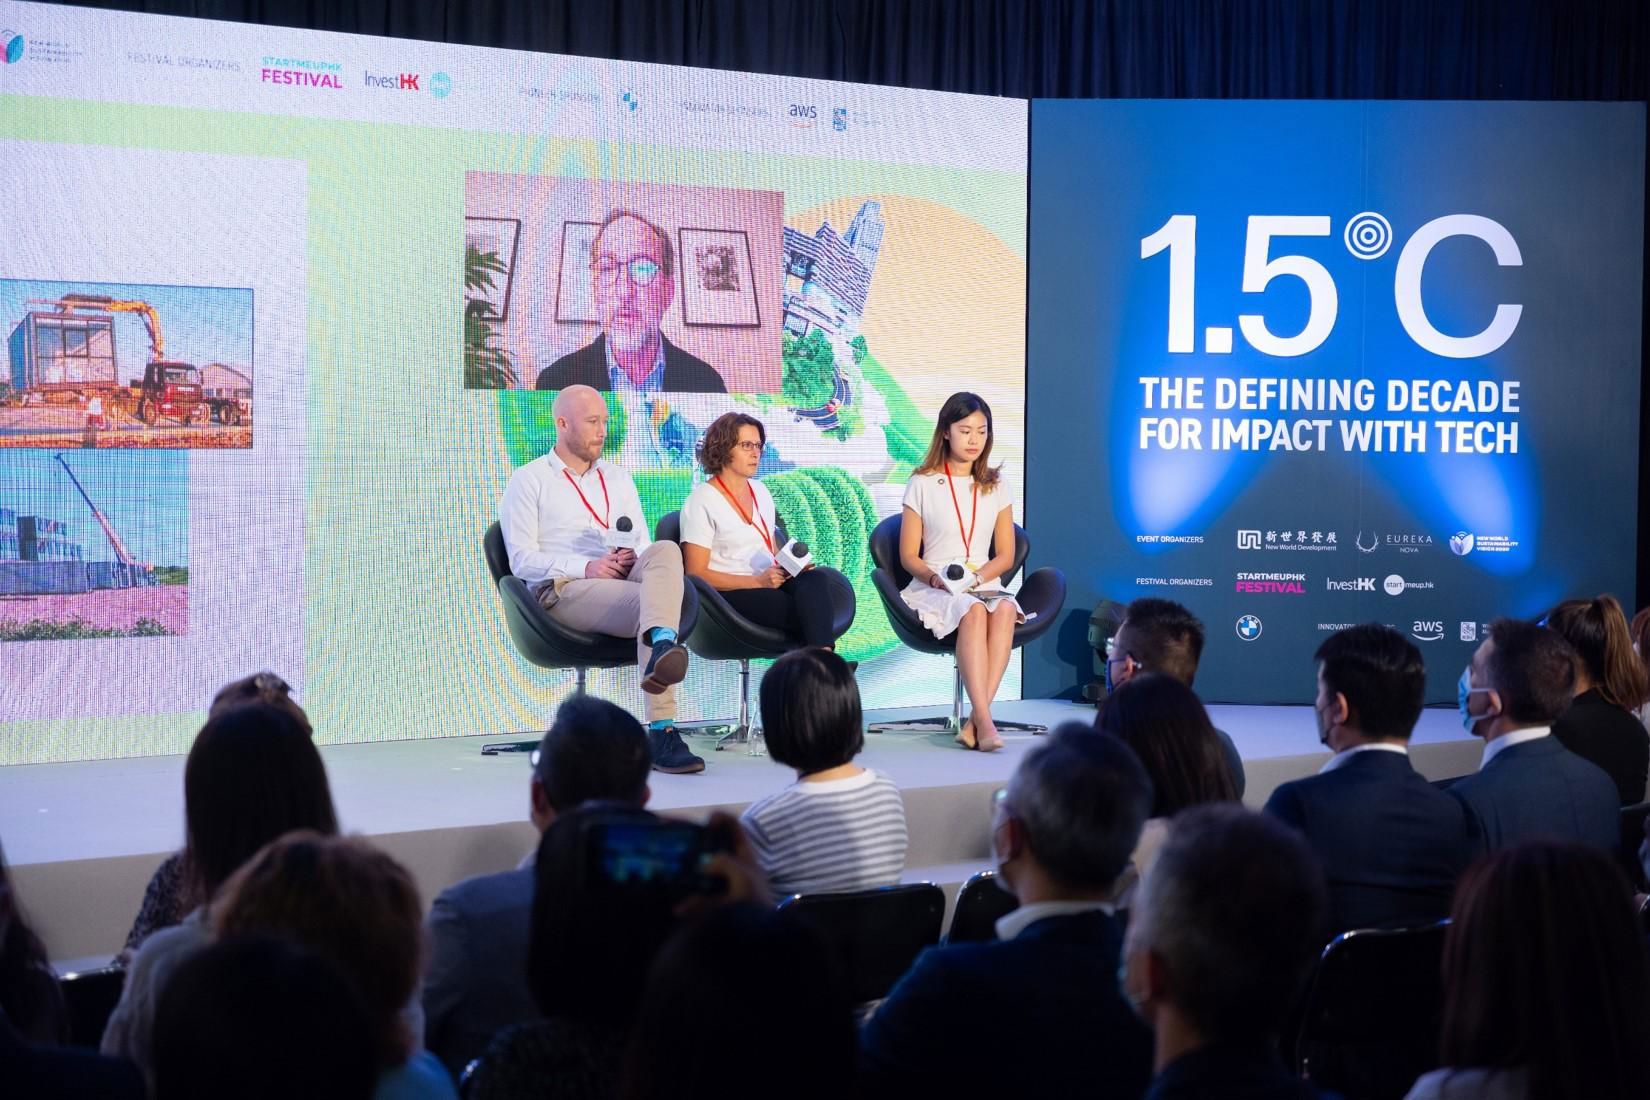 StartmeupHK Festival 2022 returned in a hybrid format this year, featuring 556 speakers and attracting over 20 000 participants from more than 100 countries and territories. Photo shows the 1.5°C Summit - The Defining Decade for Impact with Tech by Eureka Nova and New World Development.